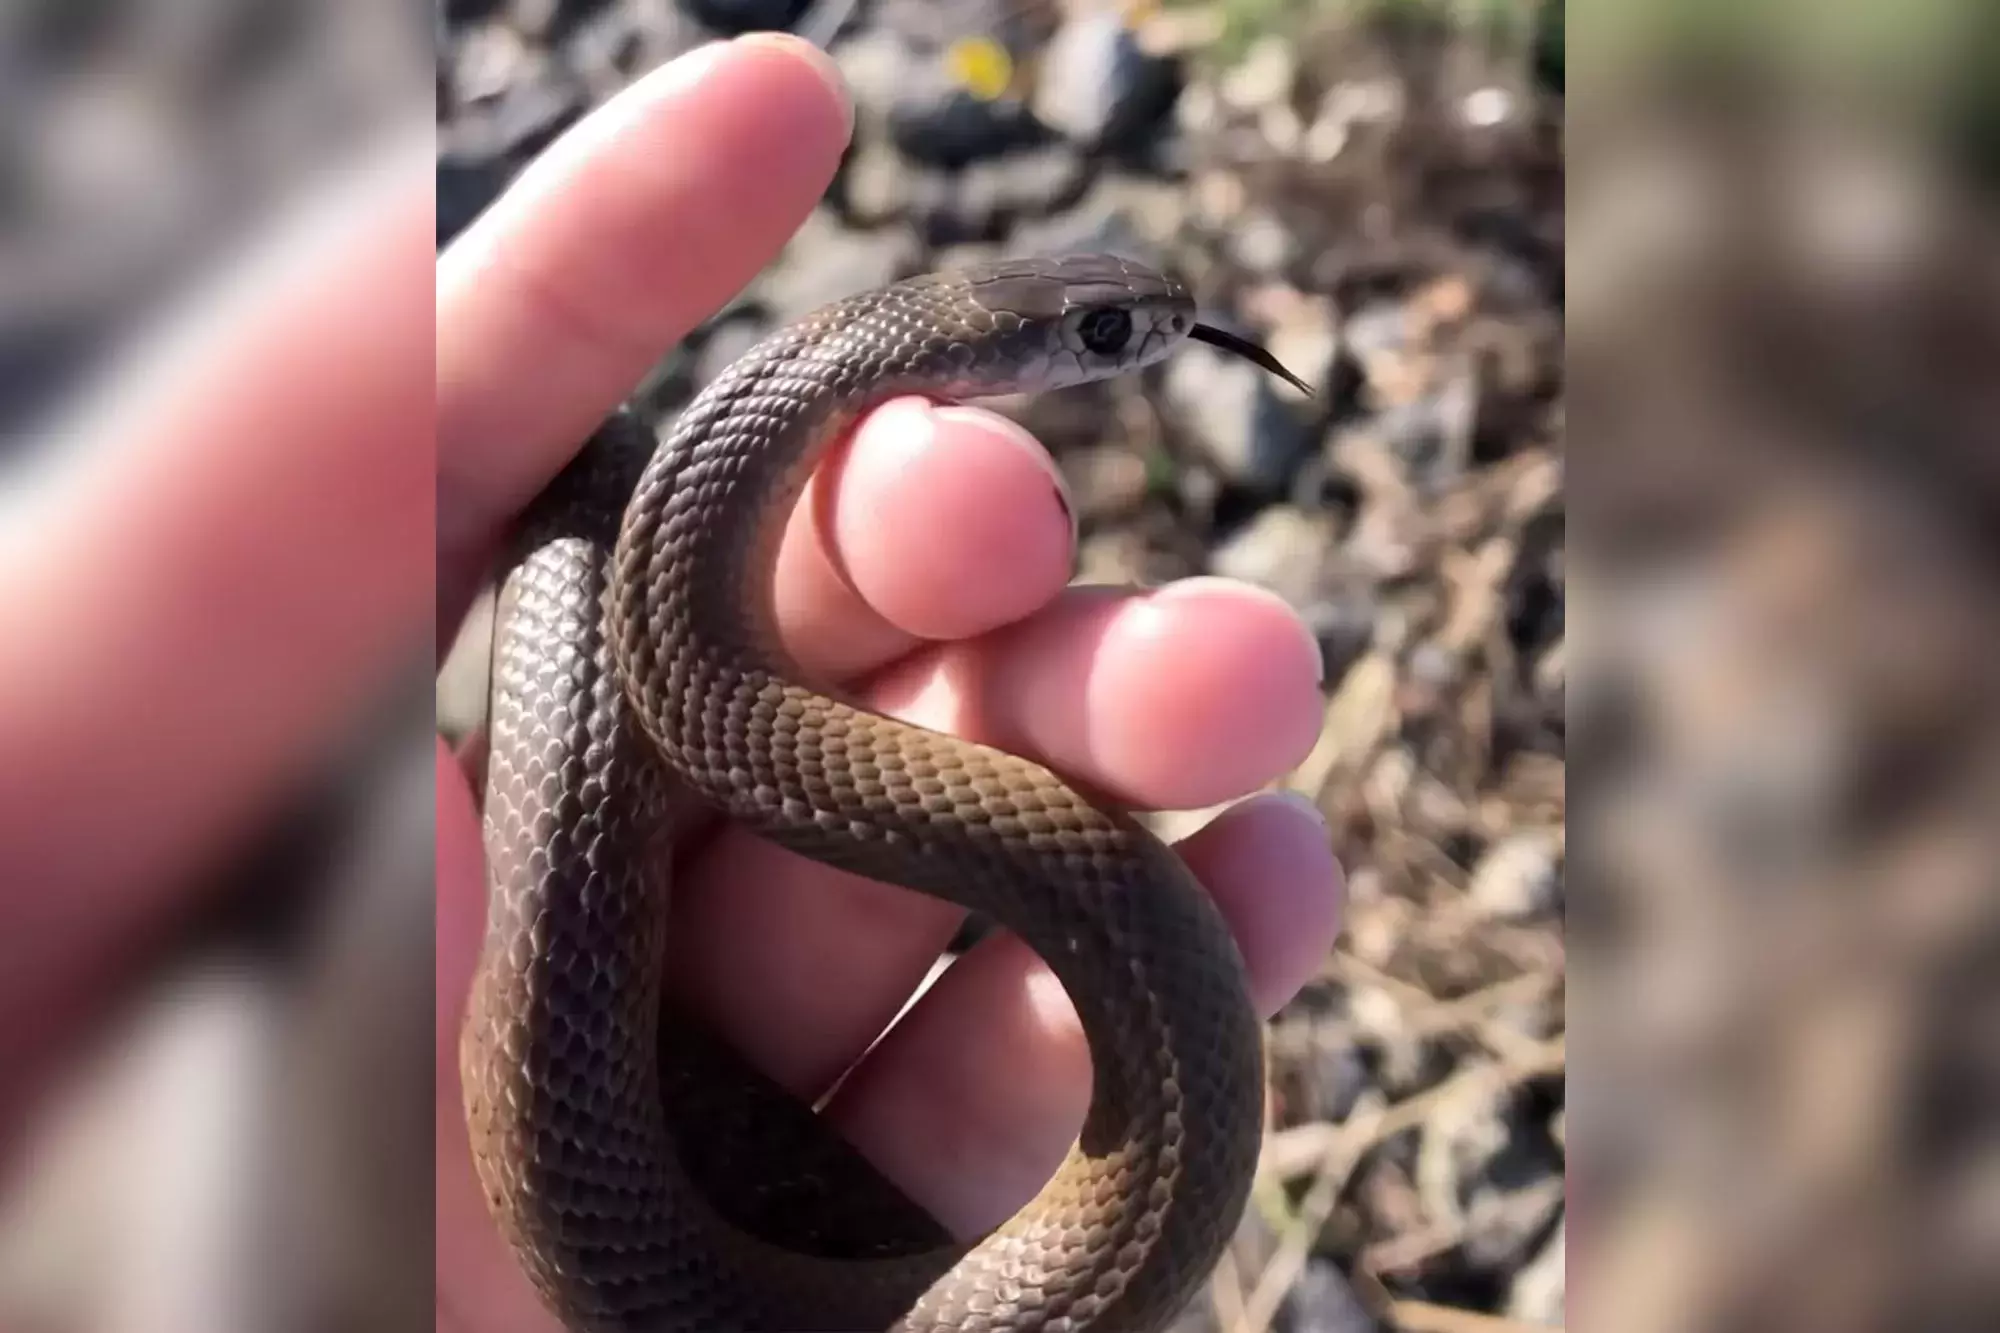 11-year-old plays with a deadly venomous snake and escapes